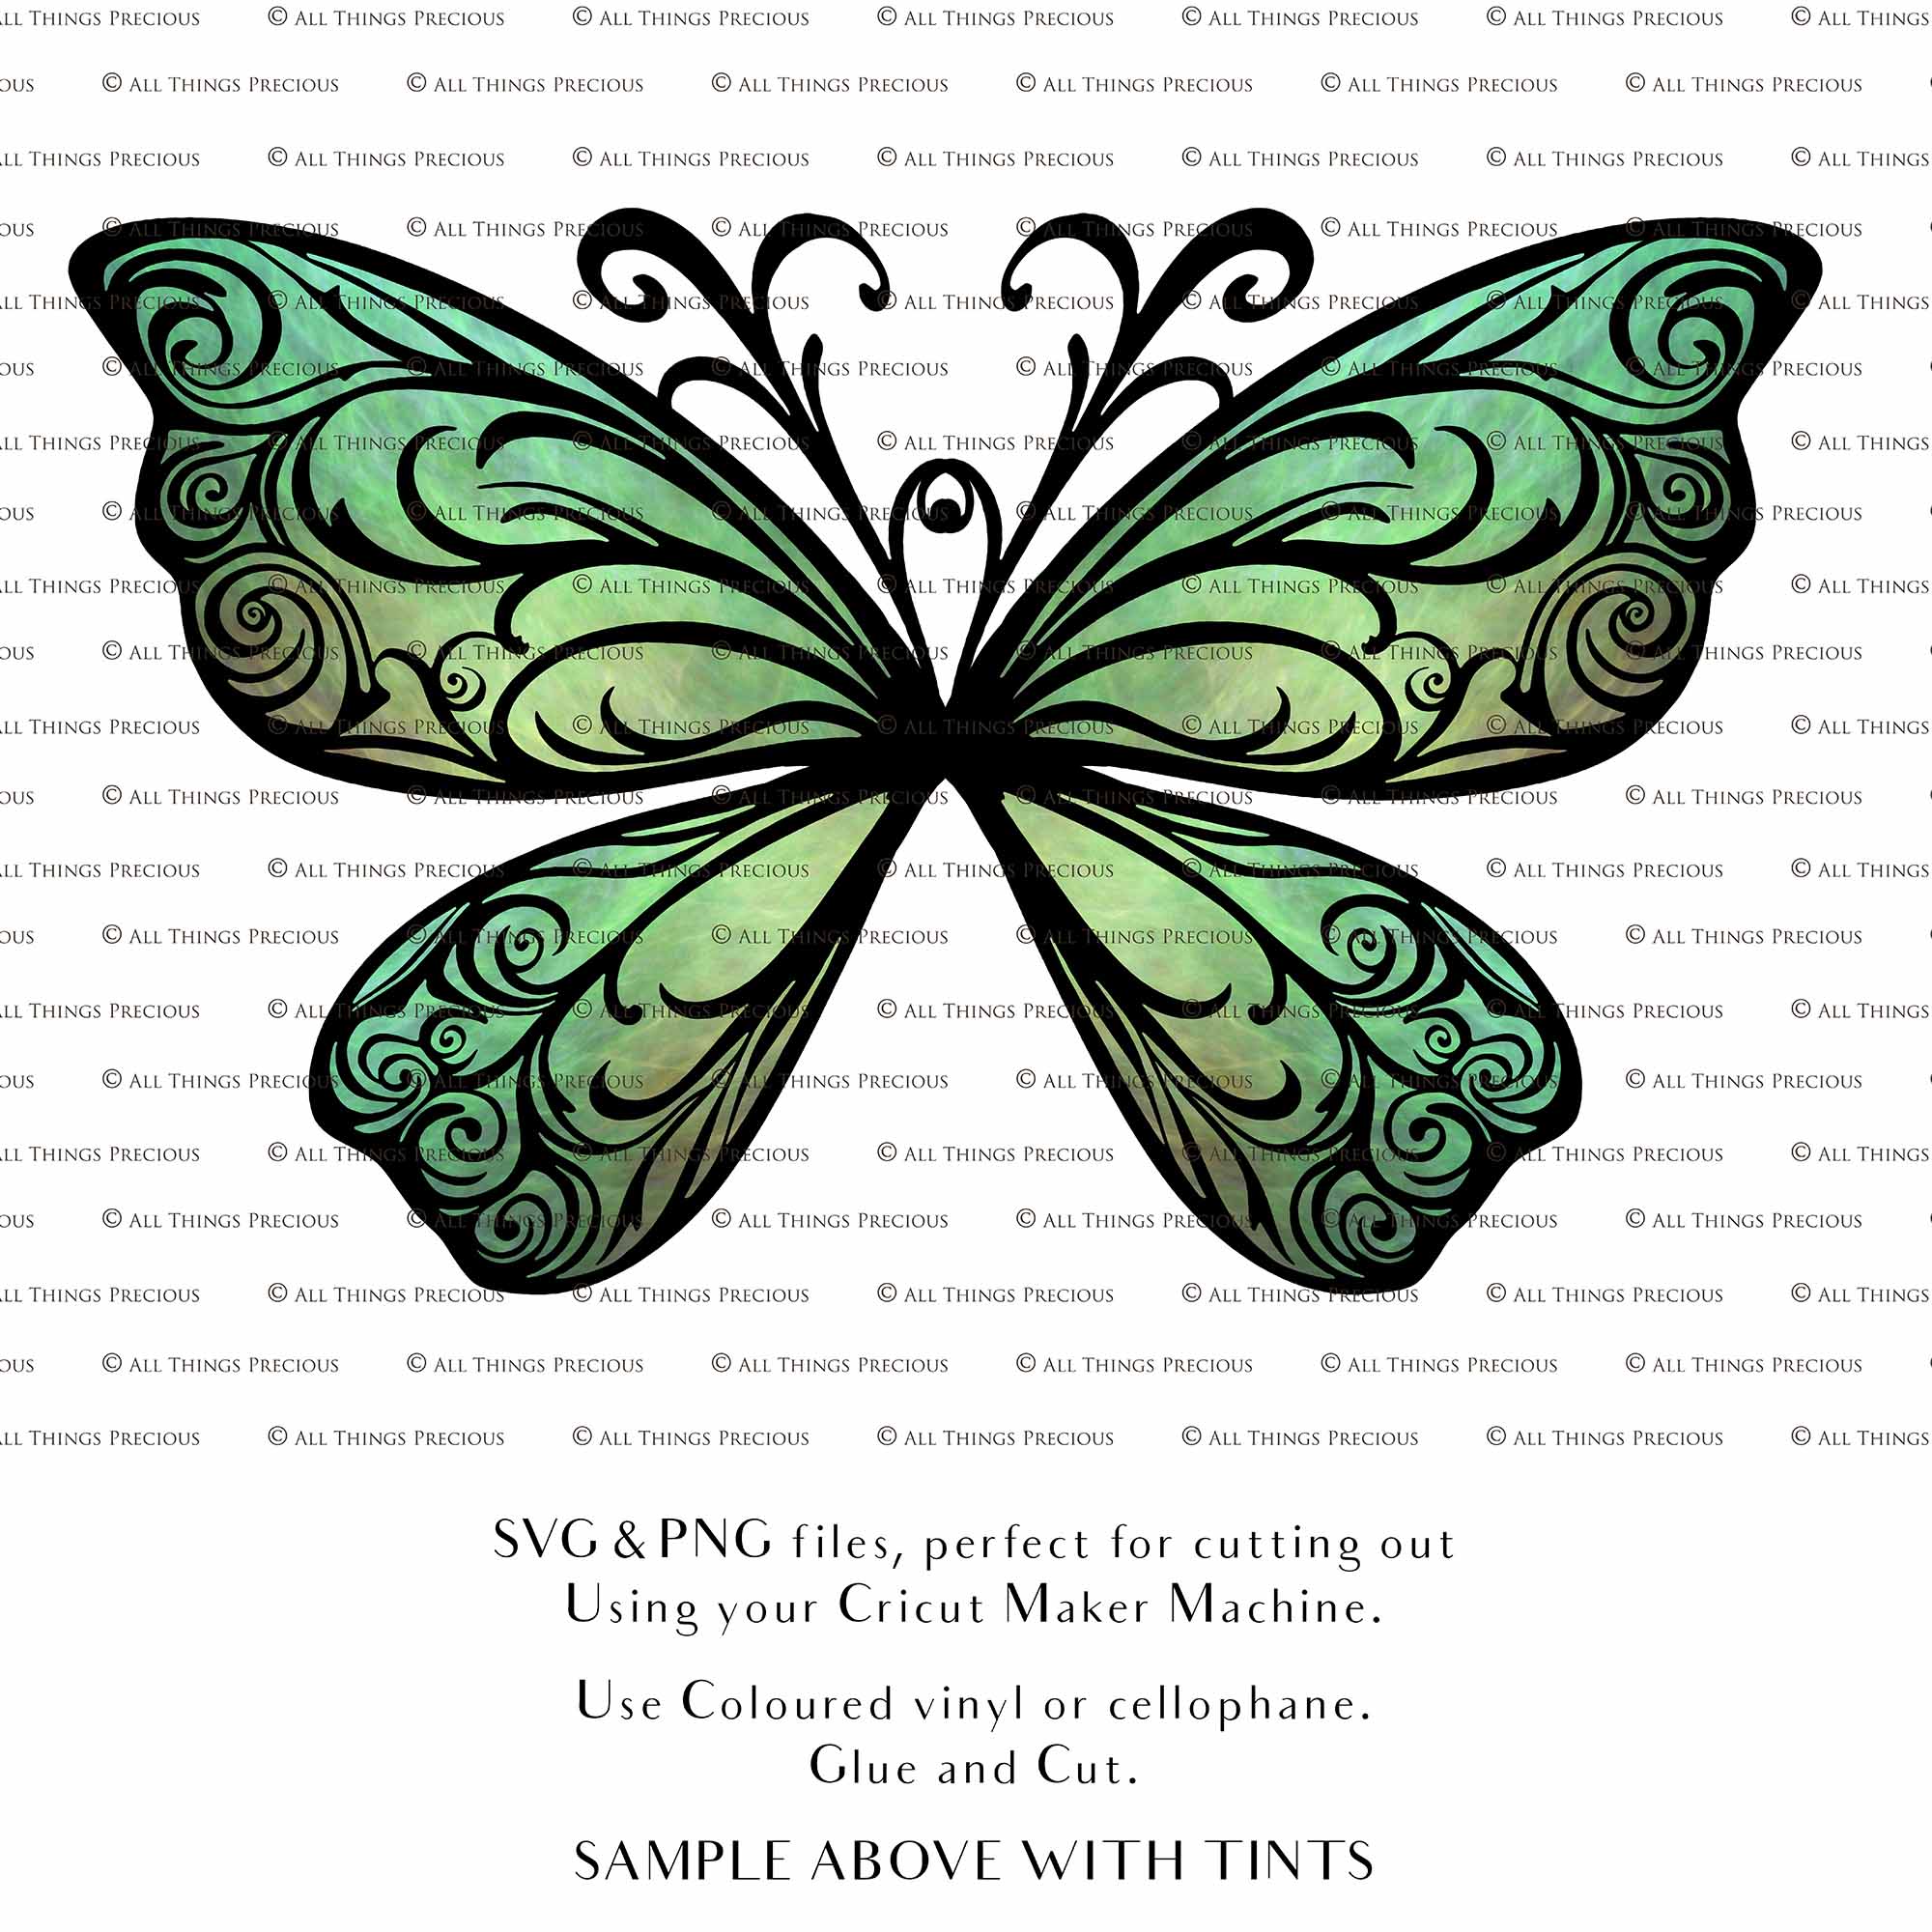 SVG Fairy wings for Paper craft. Cricut or Silhouette Cameo Cut and assemble. Halloween, Cosplay costume, wings pattern template. Png and Svg files. Digital Download.